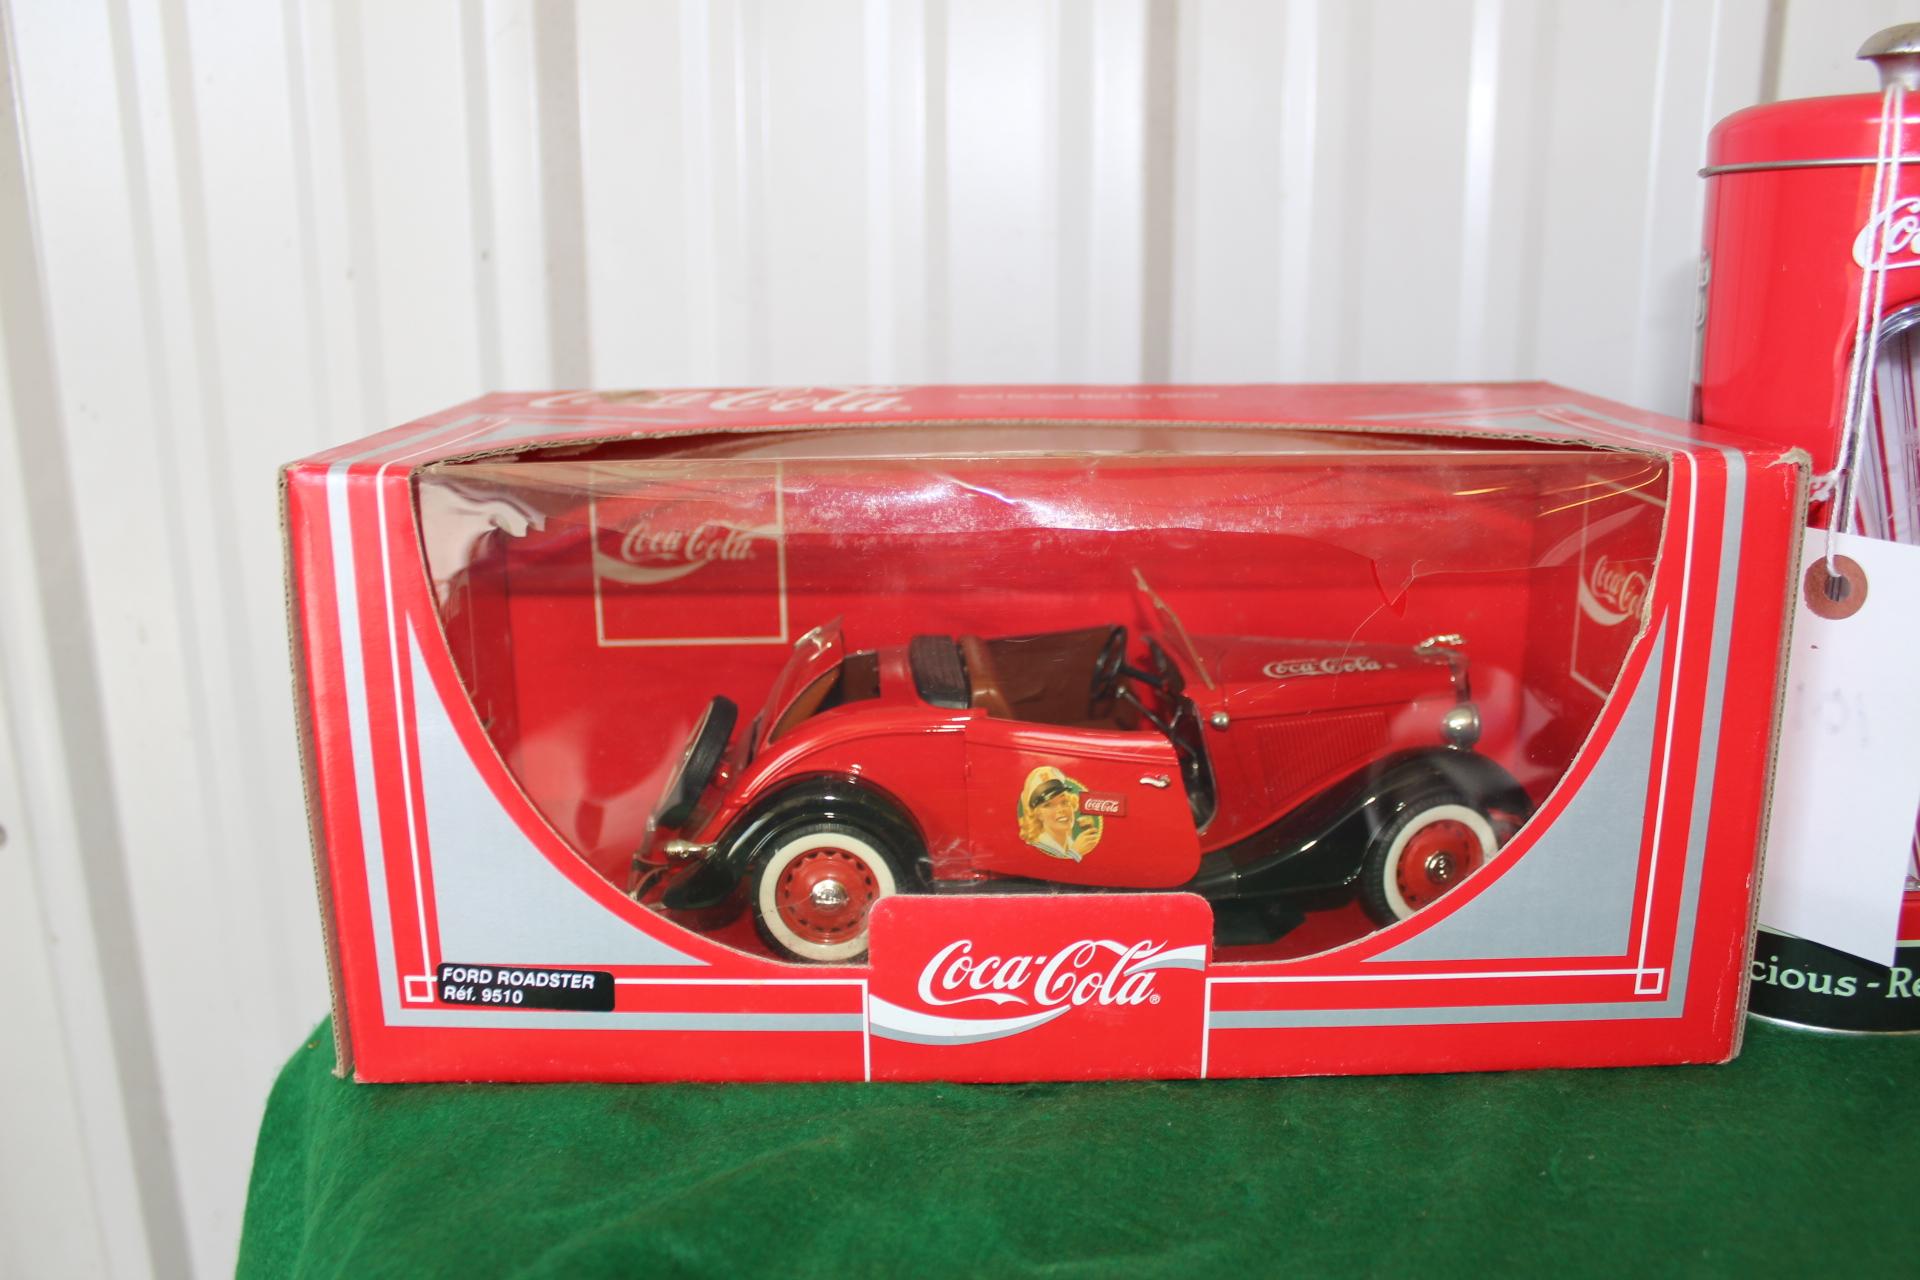 Cocal Cola replica car and canister with straws